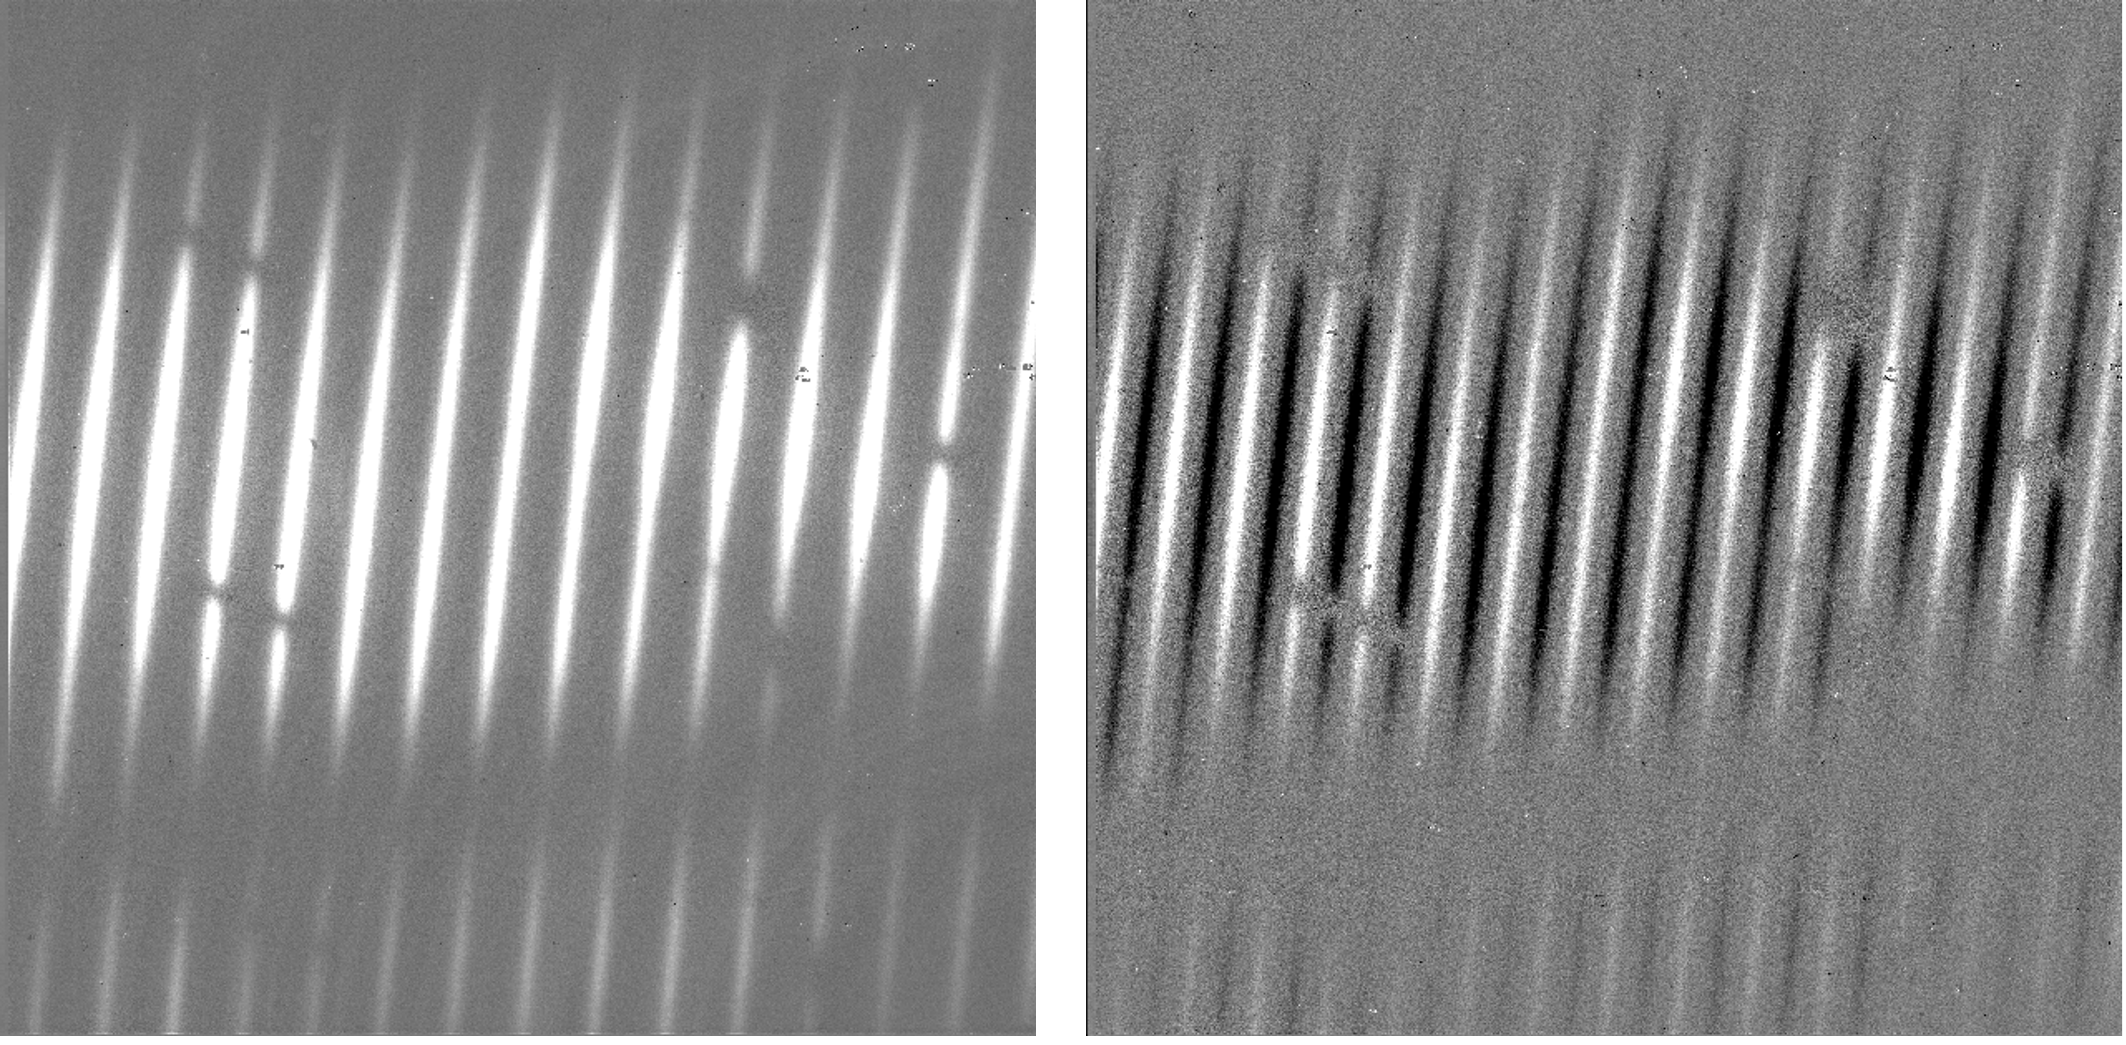 Left: square frame with bright diagonal stripes.  The source stands out from the background as a single bright spectral trace. Right: square frame with bright and dark diagonal stripes. The source is nodded on array, so appears as a positive (bright) and negative (dark) spectral trace in each order.